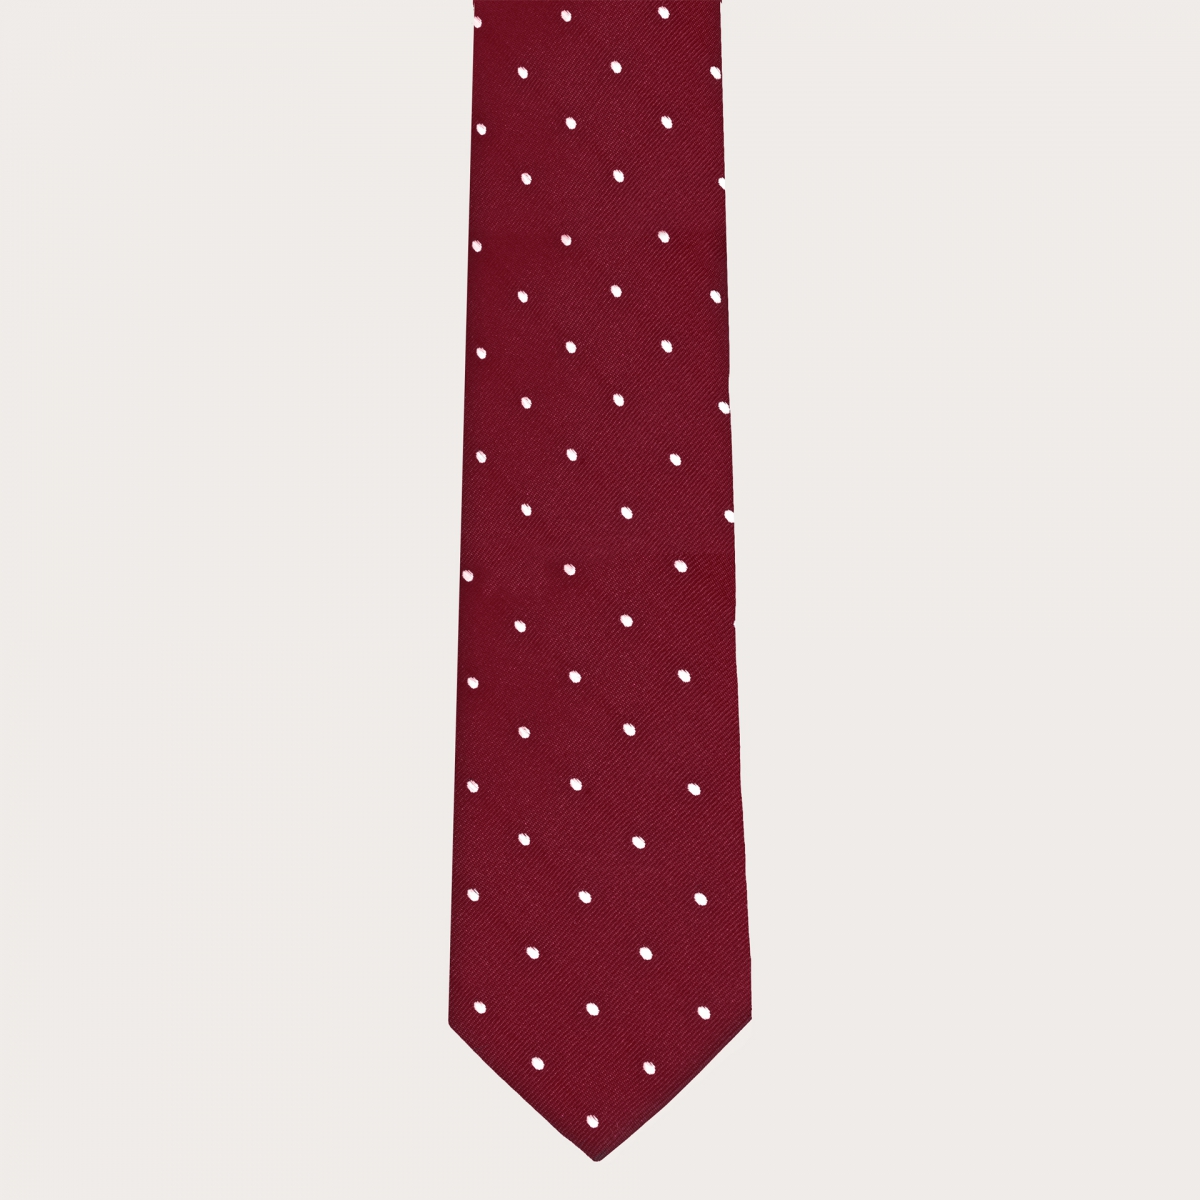 BRUCLE Coordinated suspenders and necktie in jacquard silk, bordeaux with polka dots